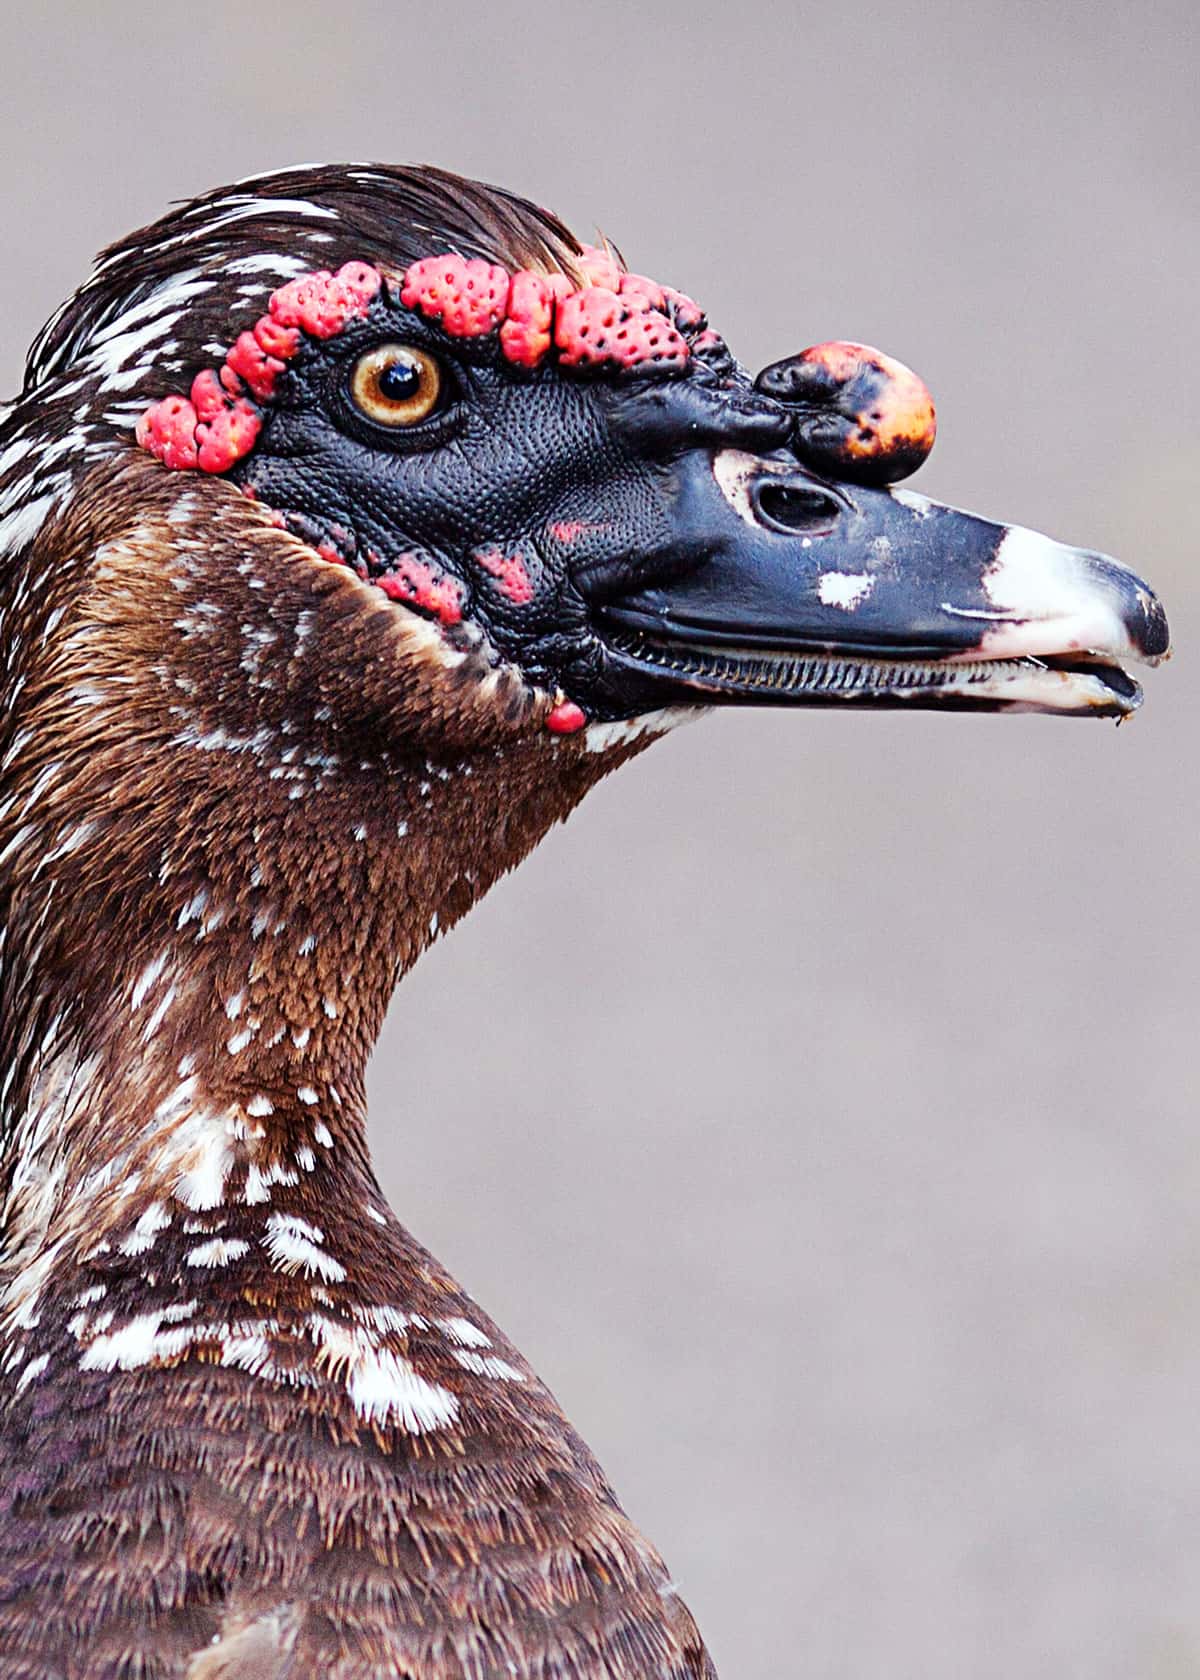 Are Muscovy ducks friendly?